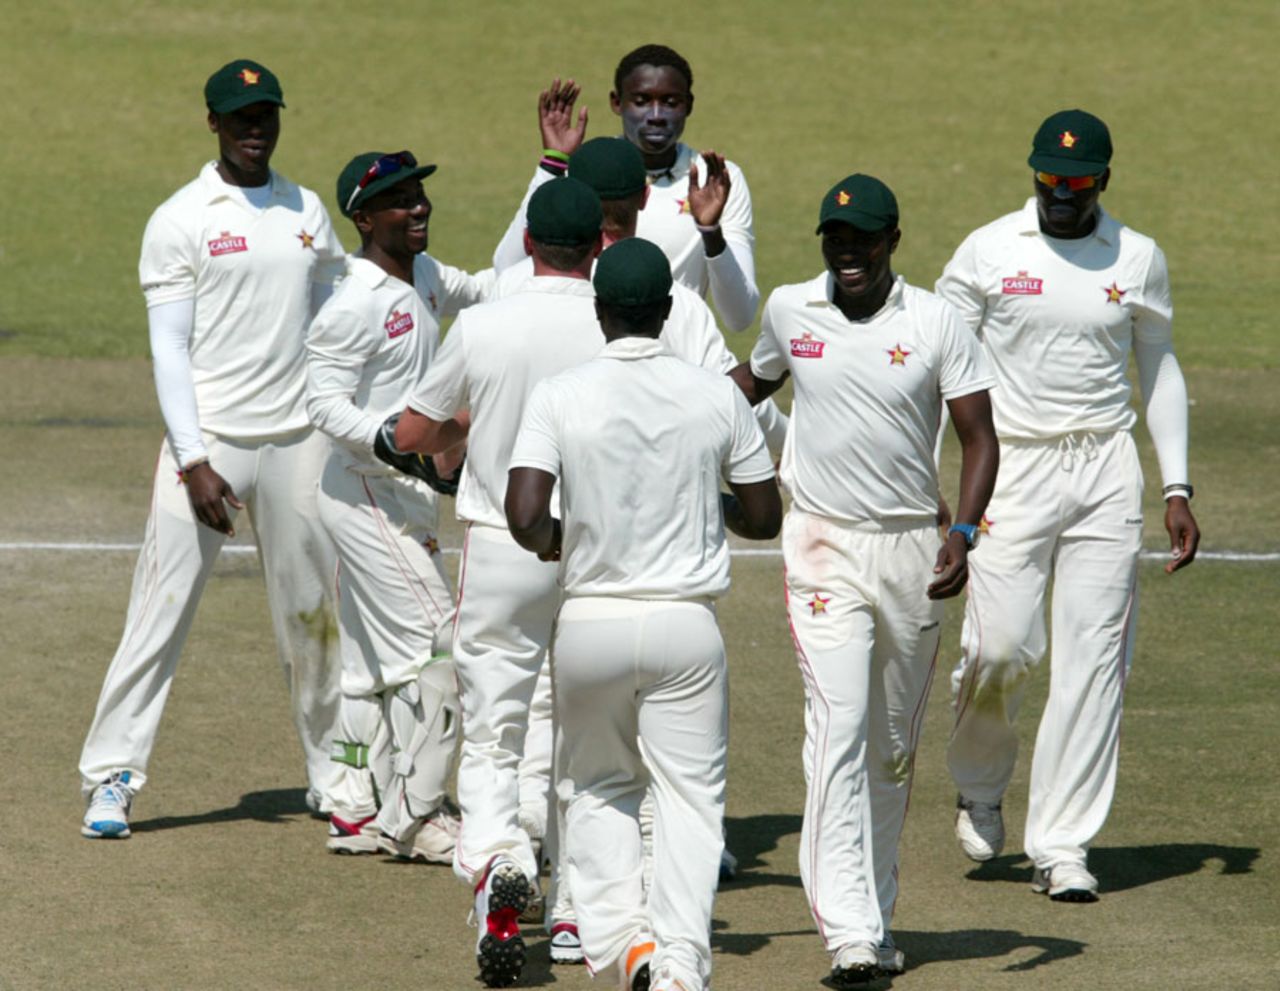 Zimbabwe get together after a wicket on the final day, Bangladesh v Zimbabwe, only Test, Harare, 5th day, August 8, 2011